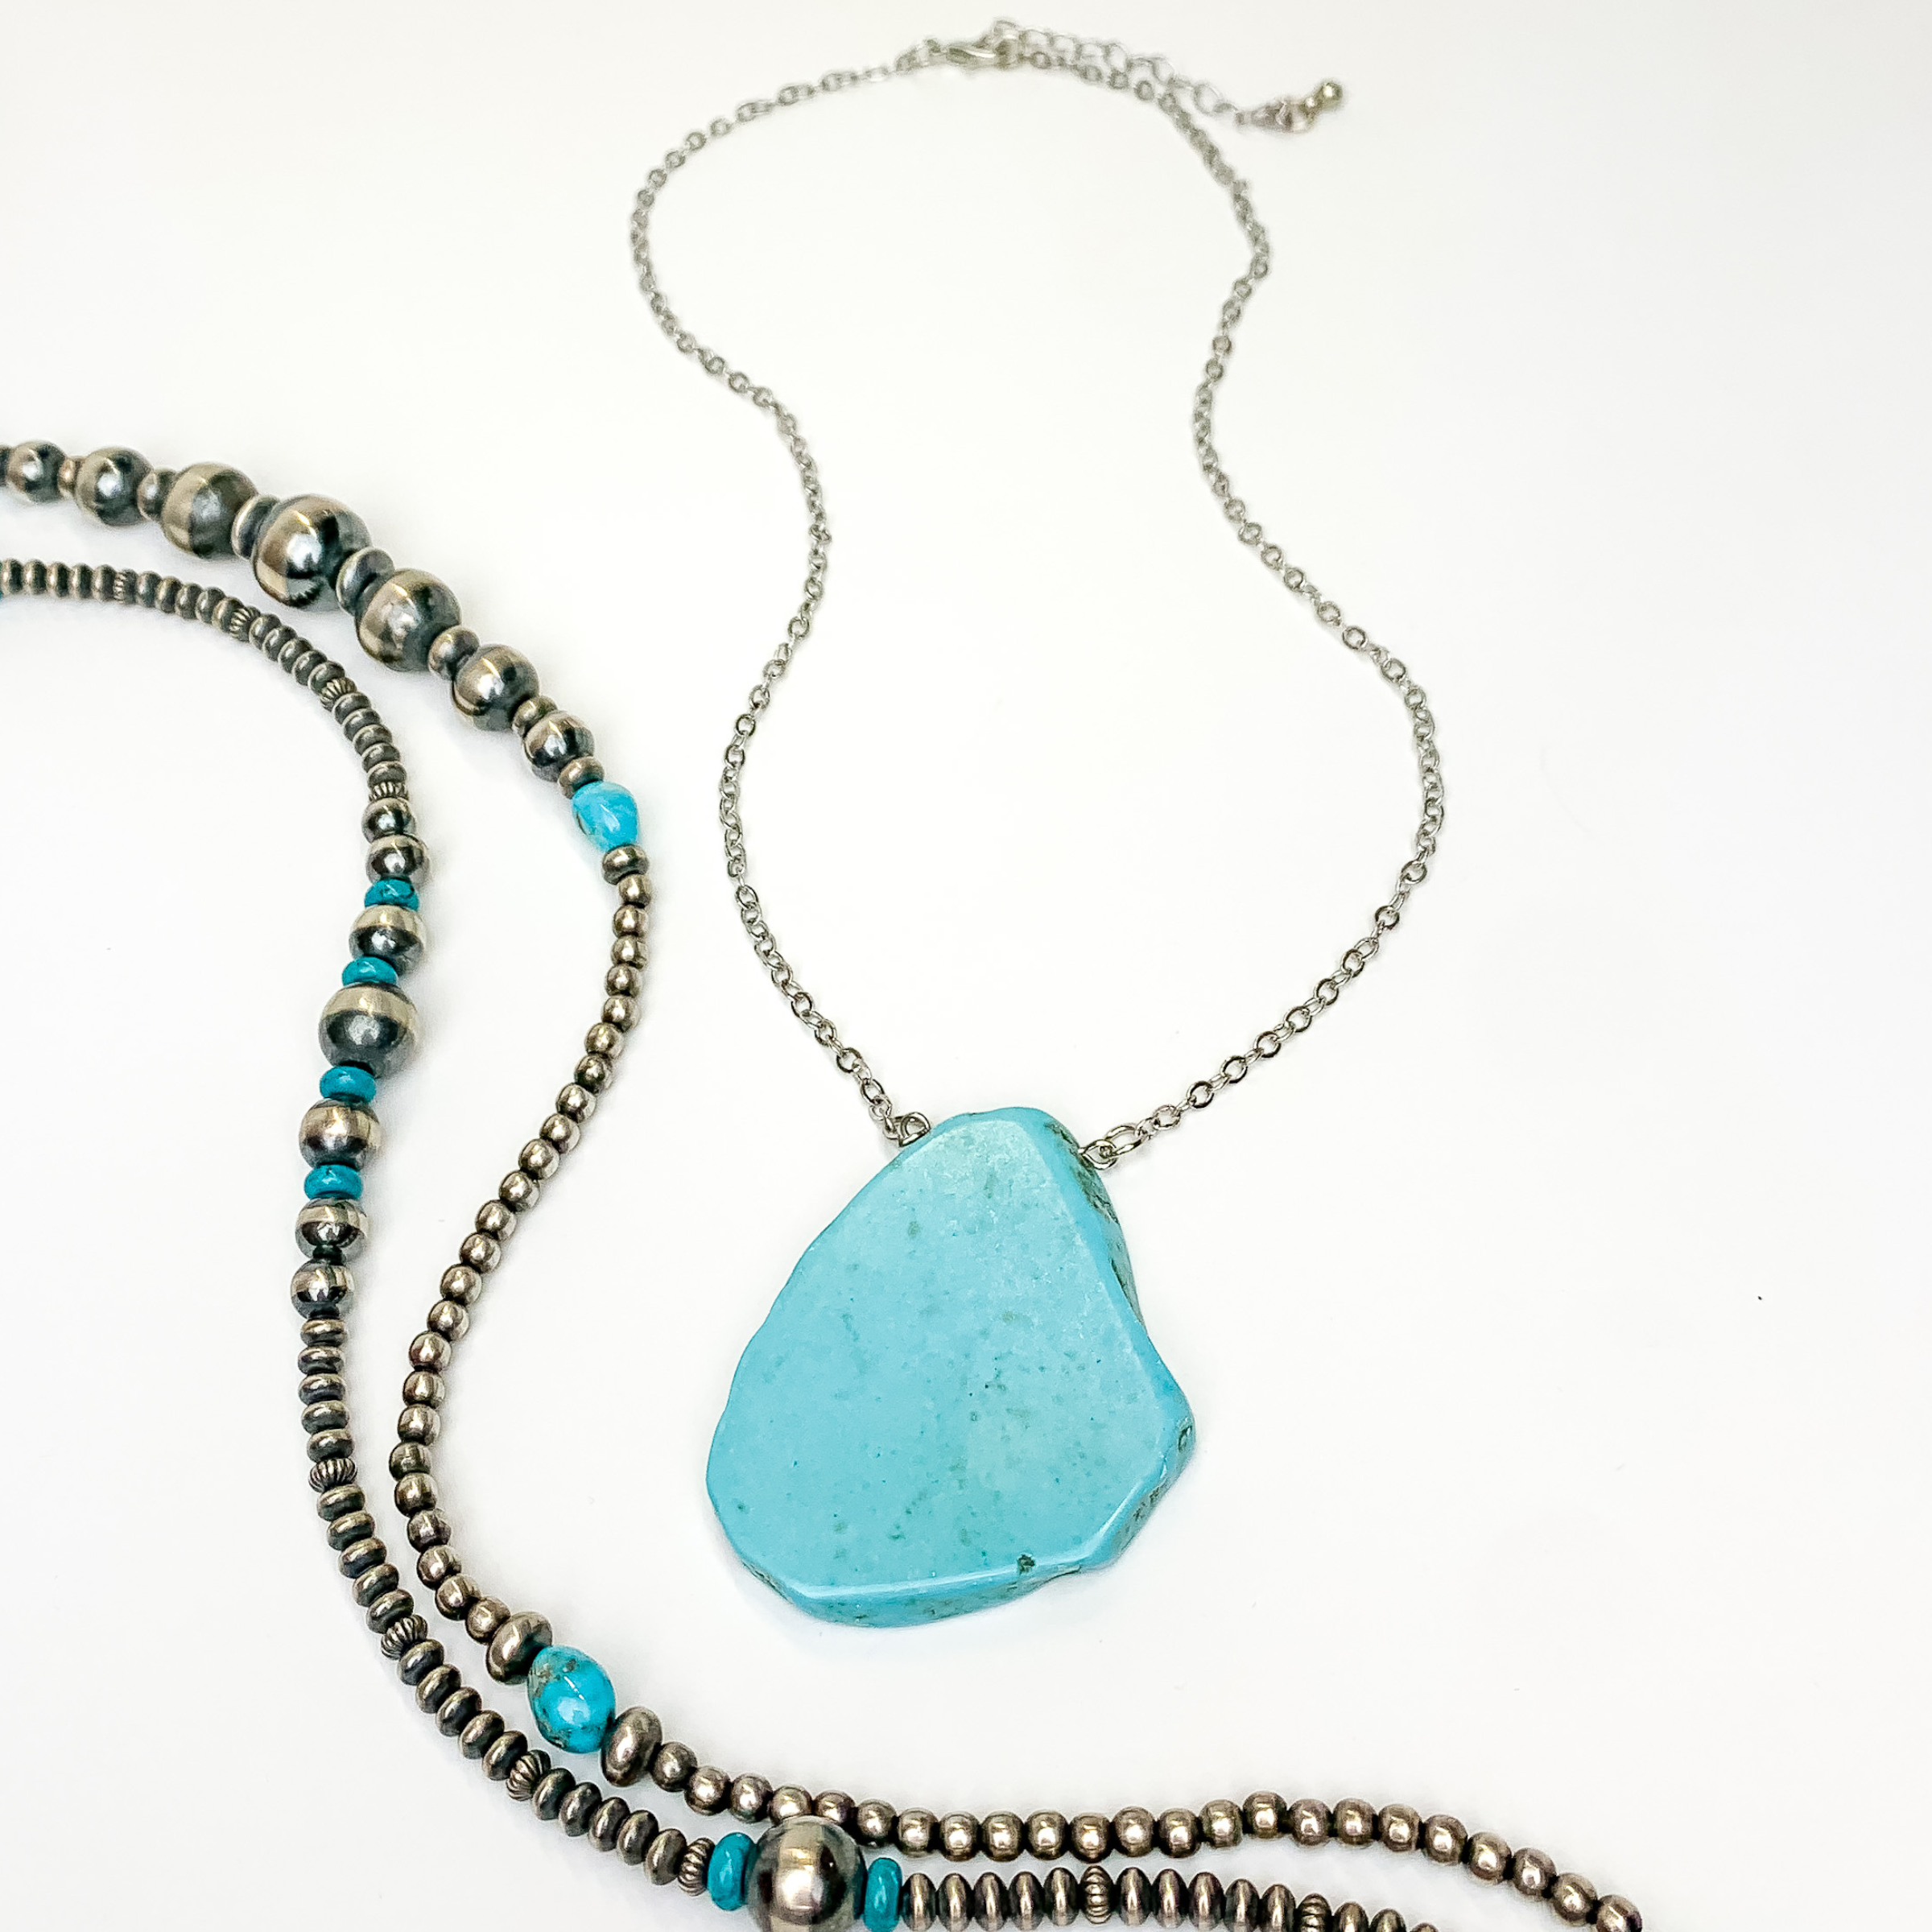 Silver chain necklace with turquoise slab pendant. This necklace is pictured on an white background with silver and turquoise beads on the right side of the picture.